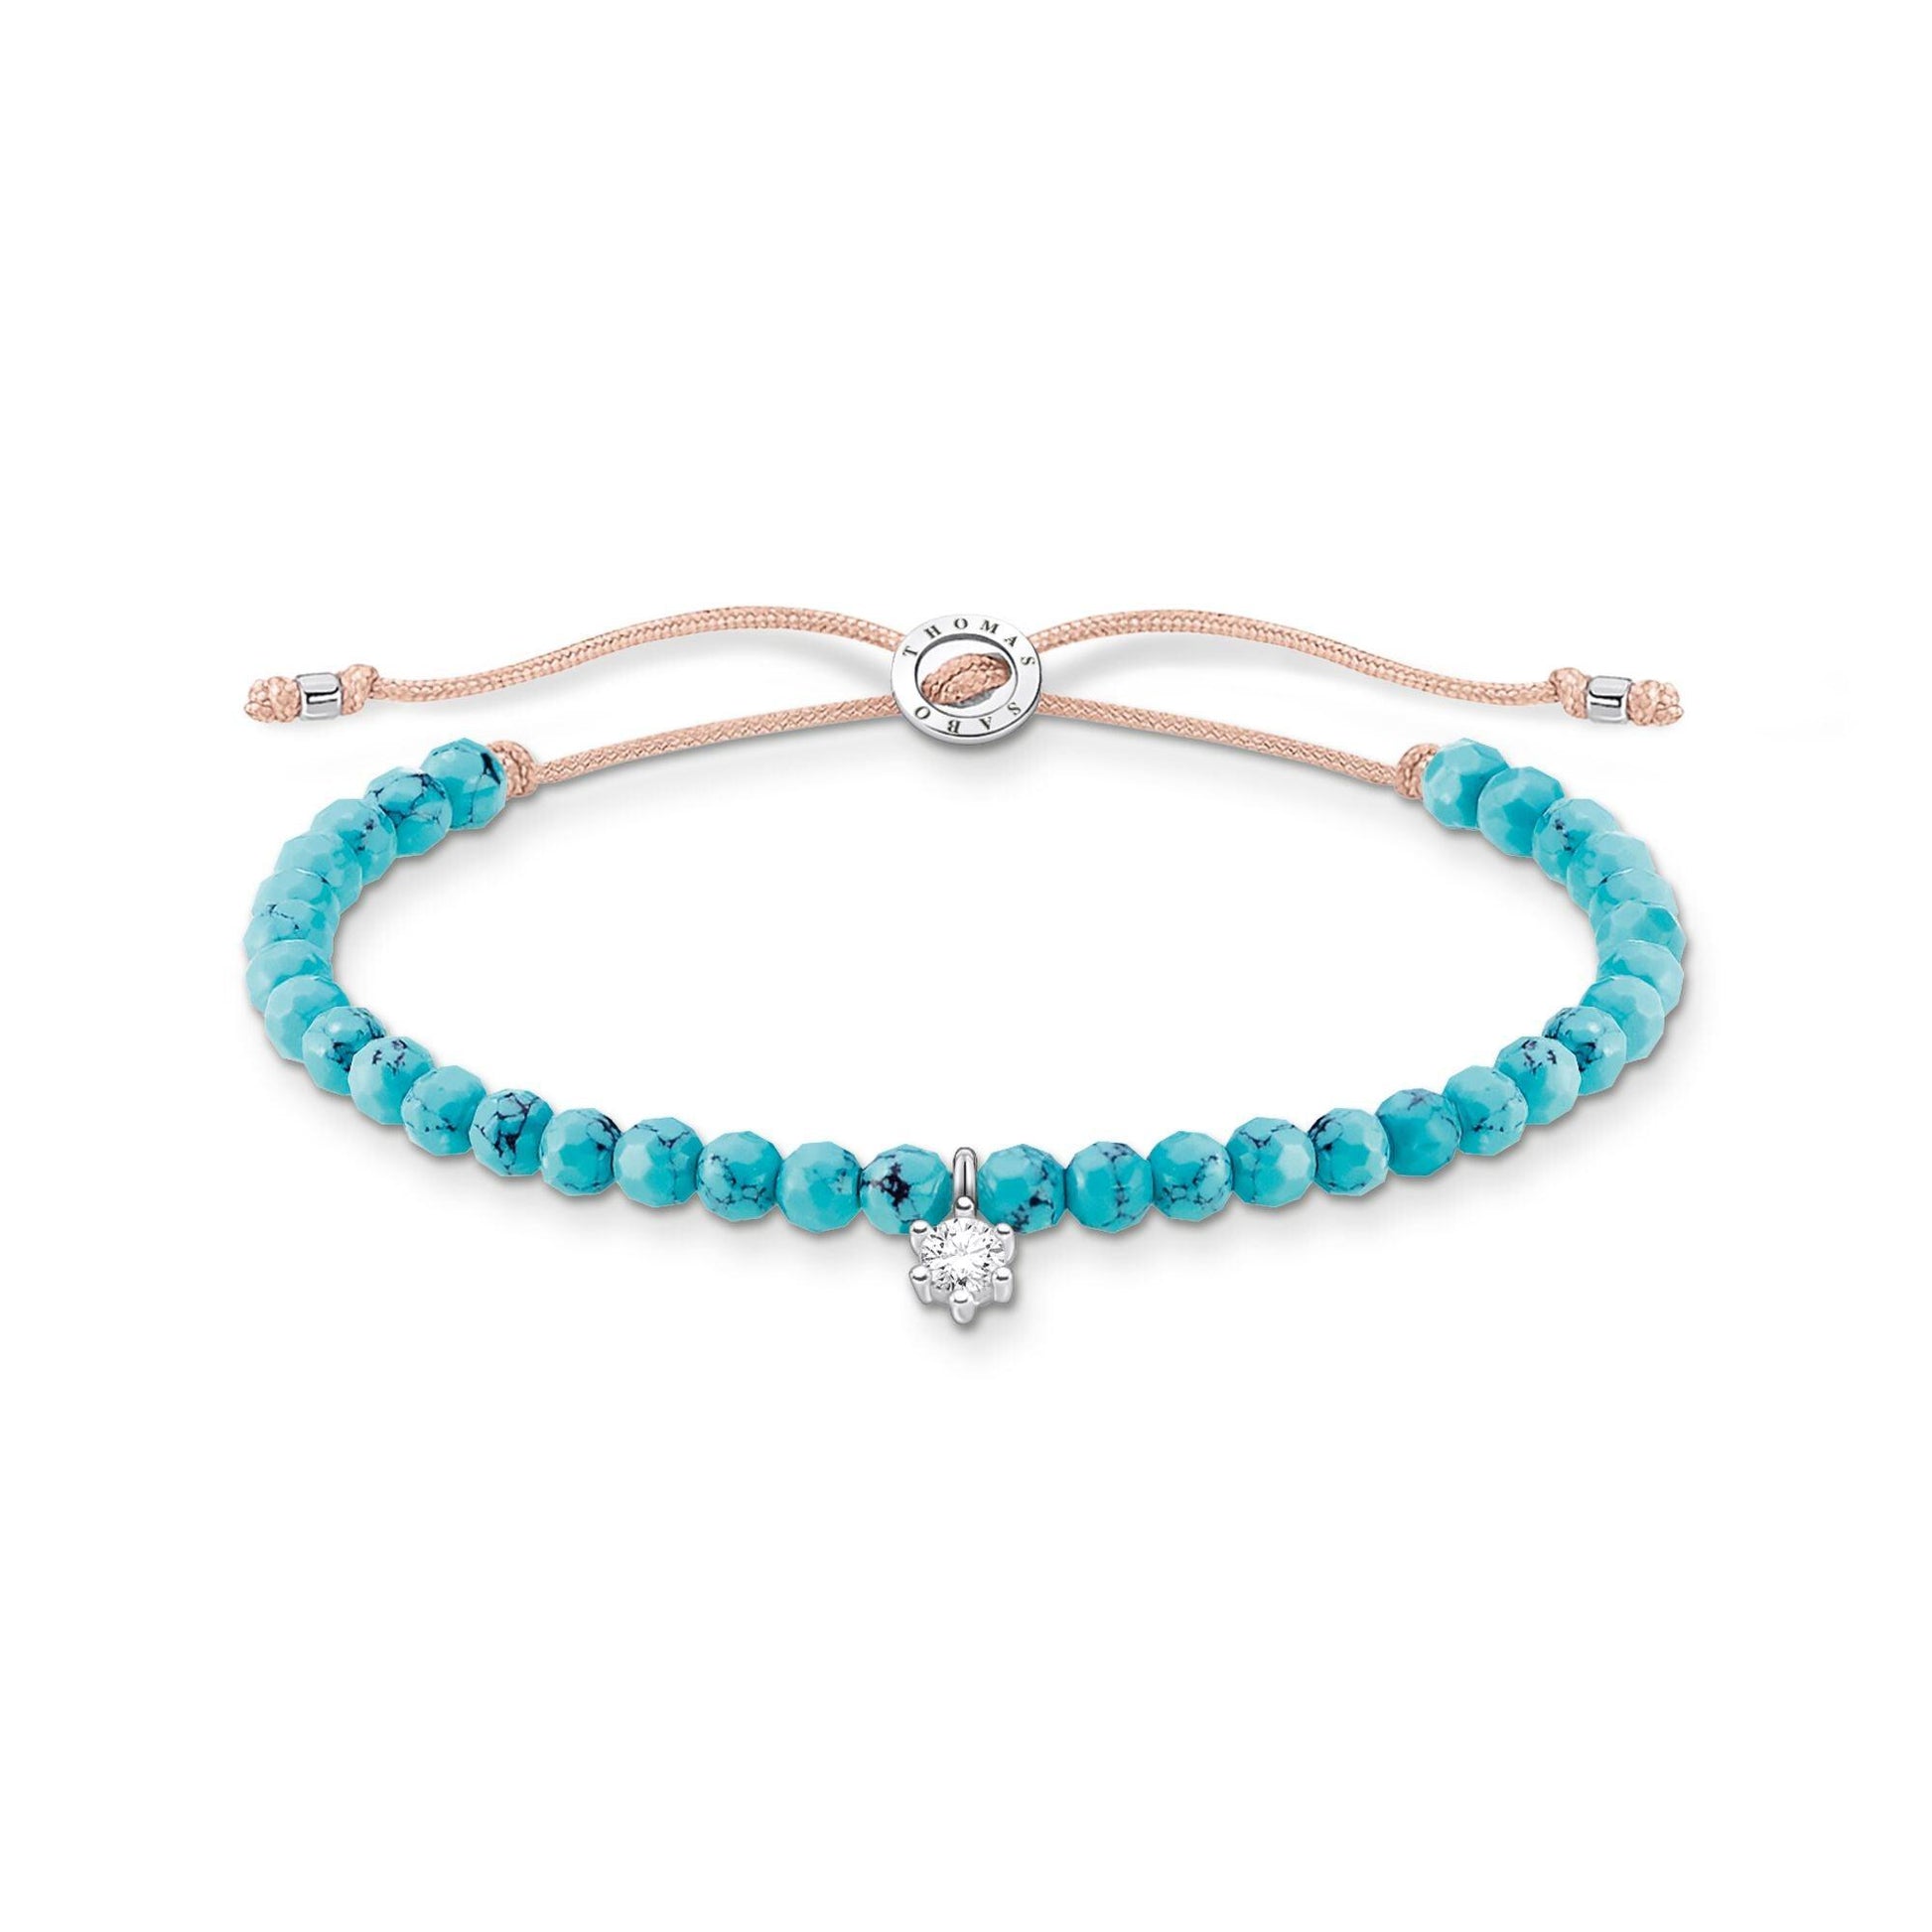 Thomas Sabo Simulated Turquoise Beaded Bracelet with Cubic Zirconia Charm A1987-905-17 - Judith Hart Jewellers